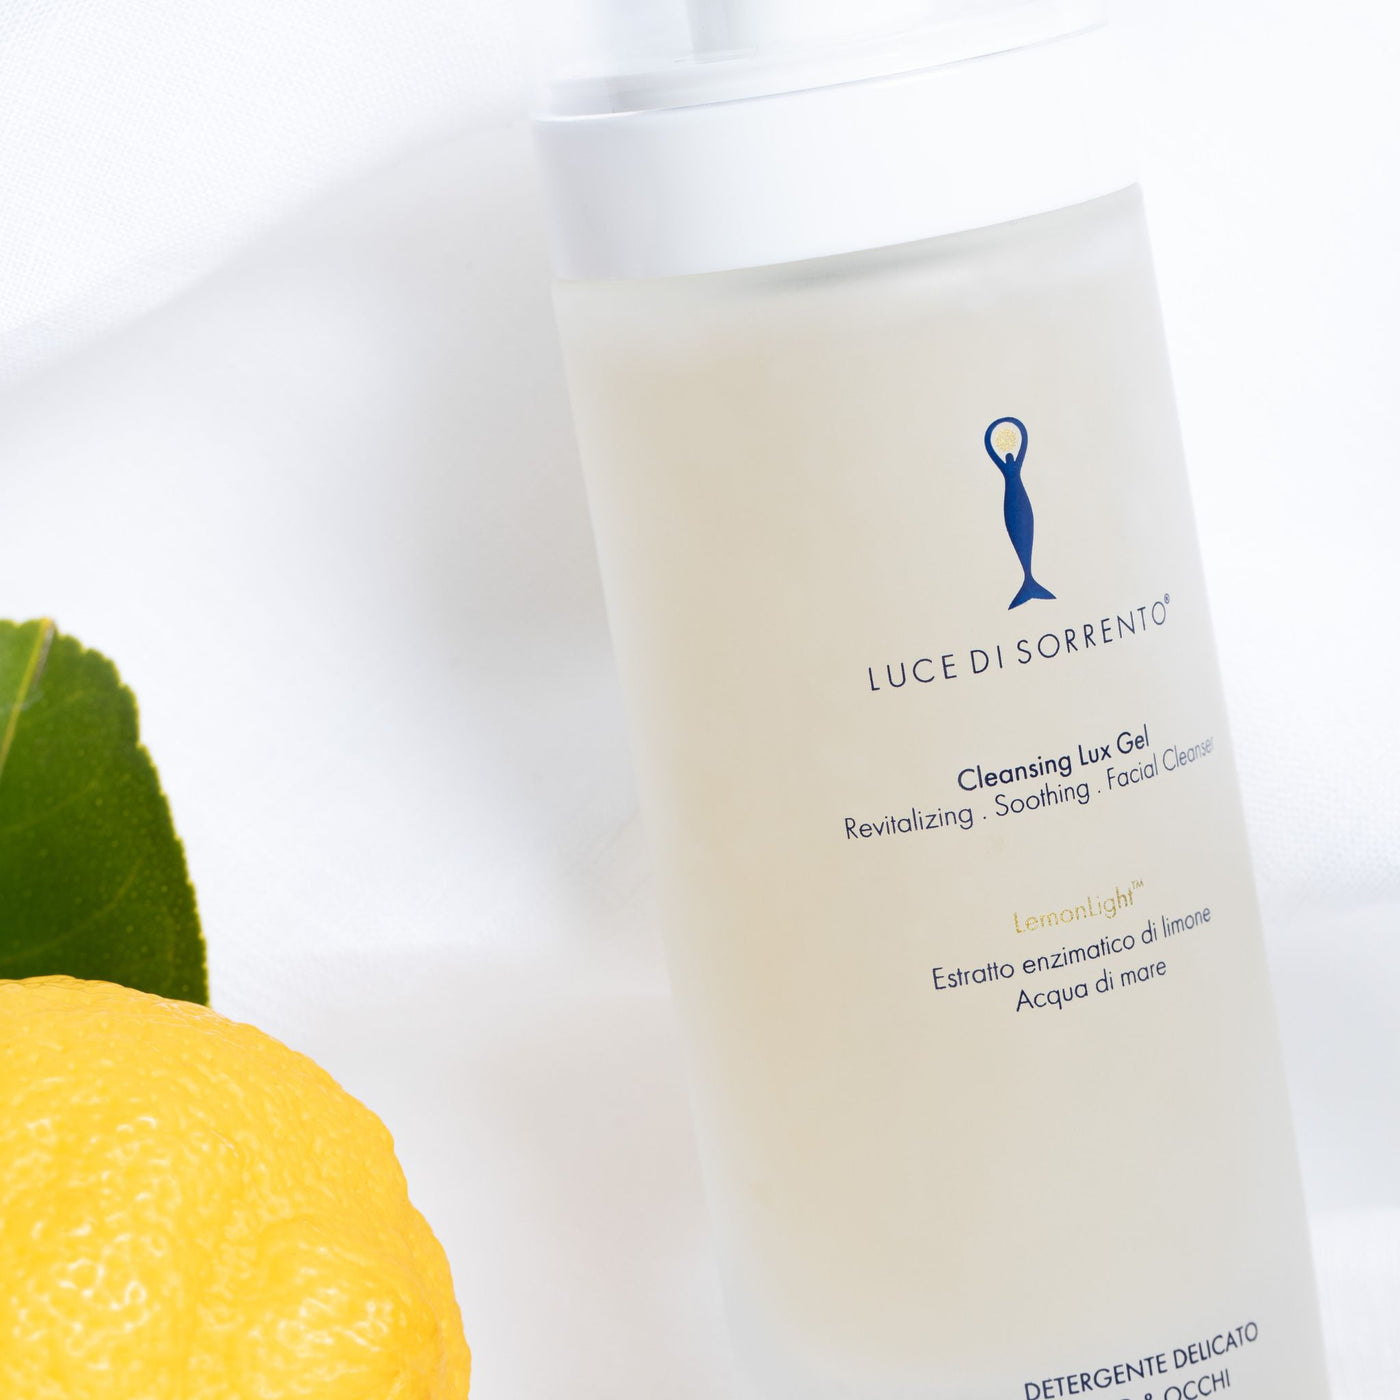 Cleansing lux face gel 